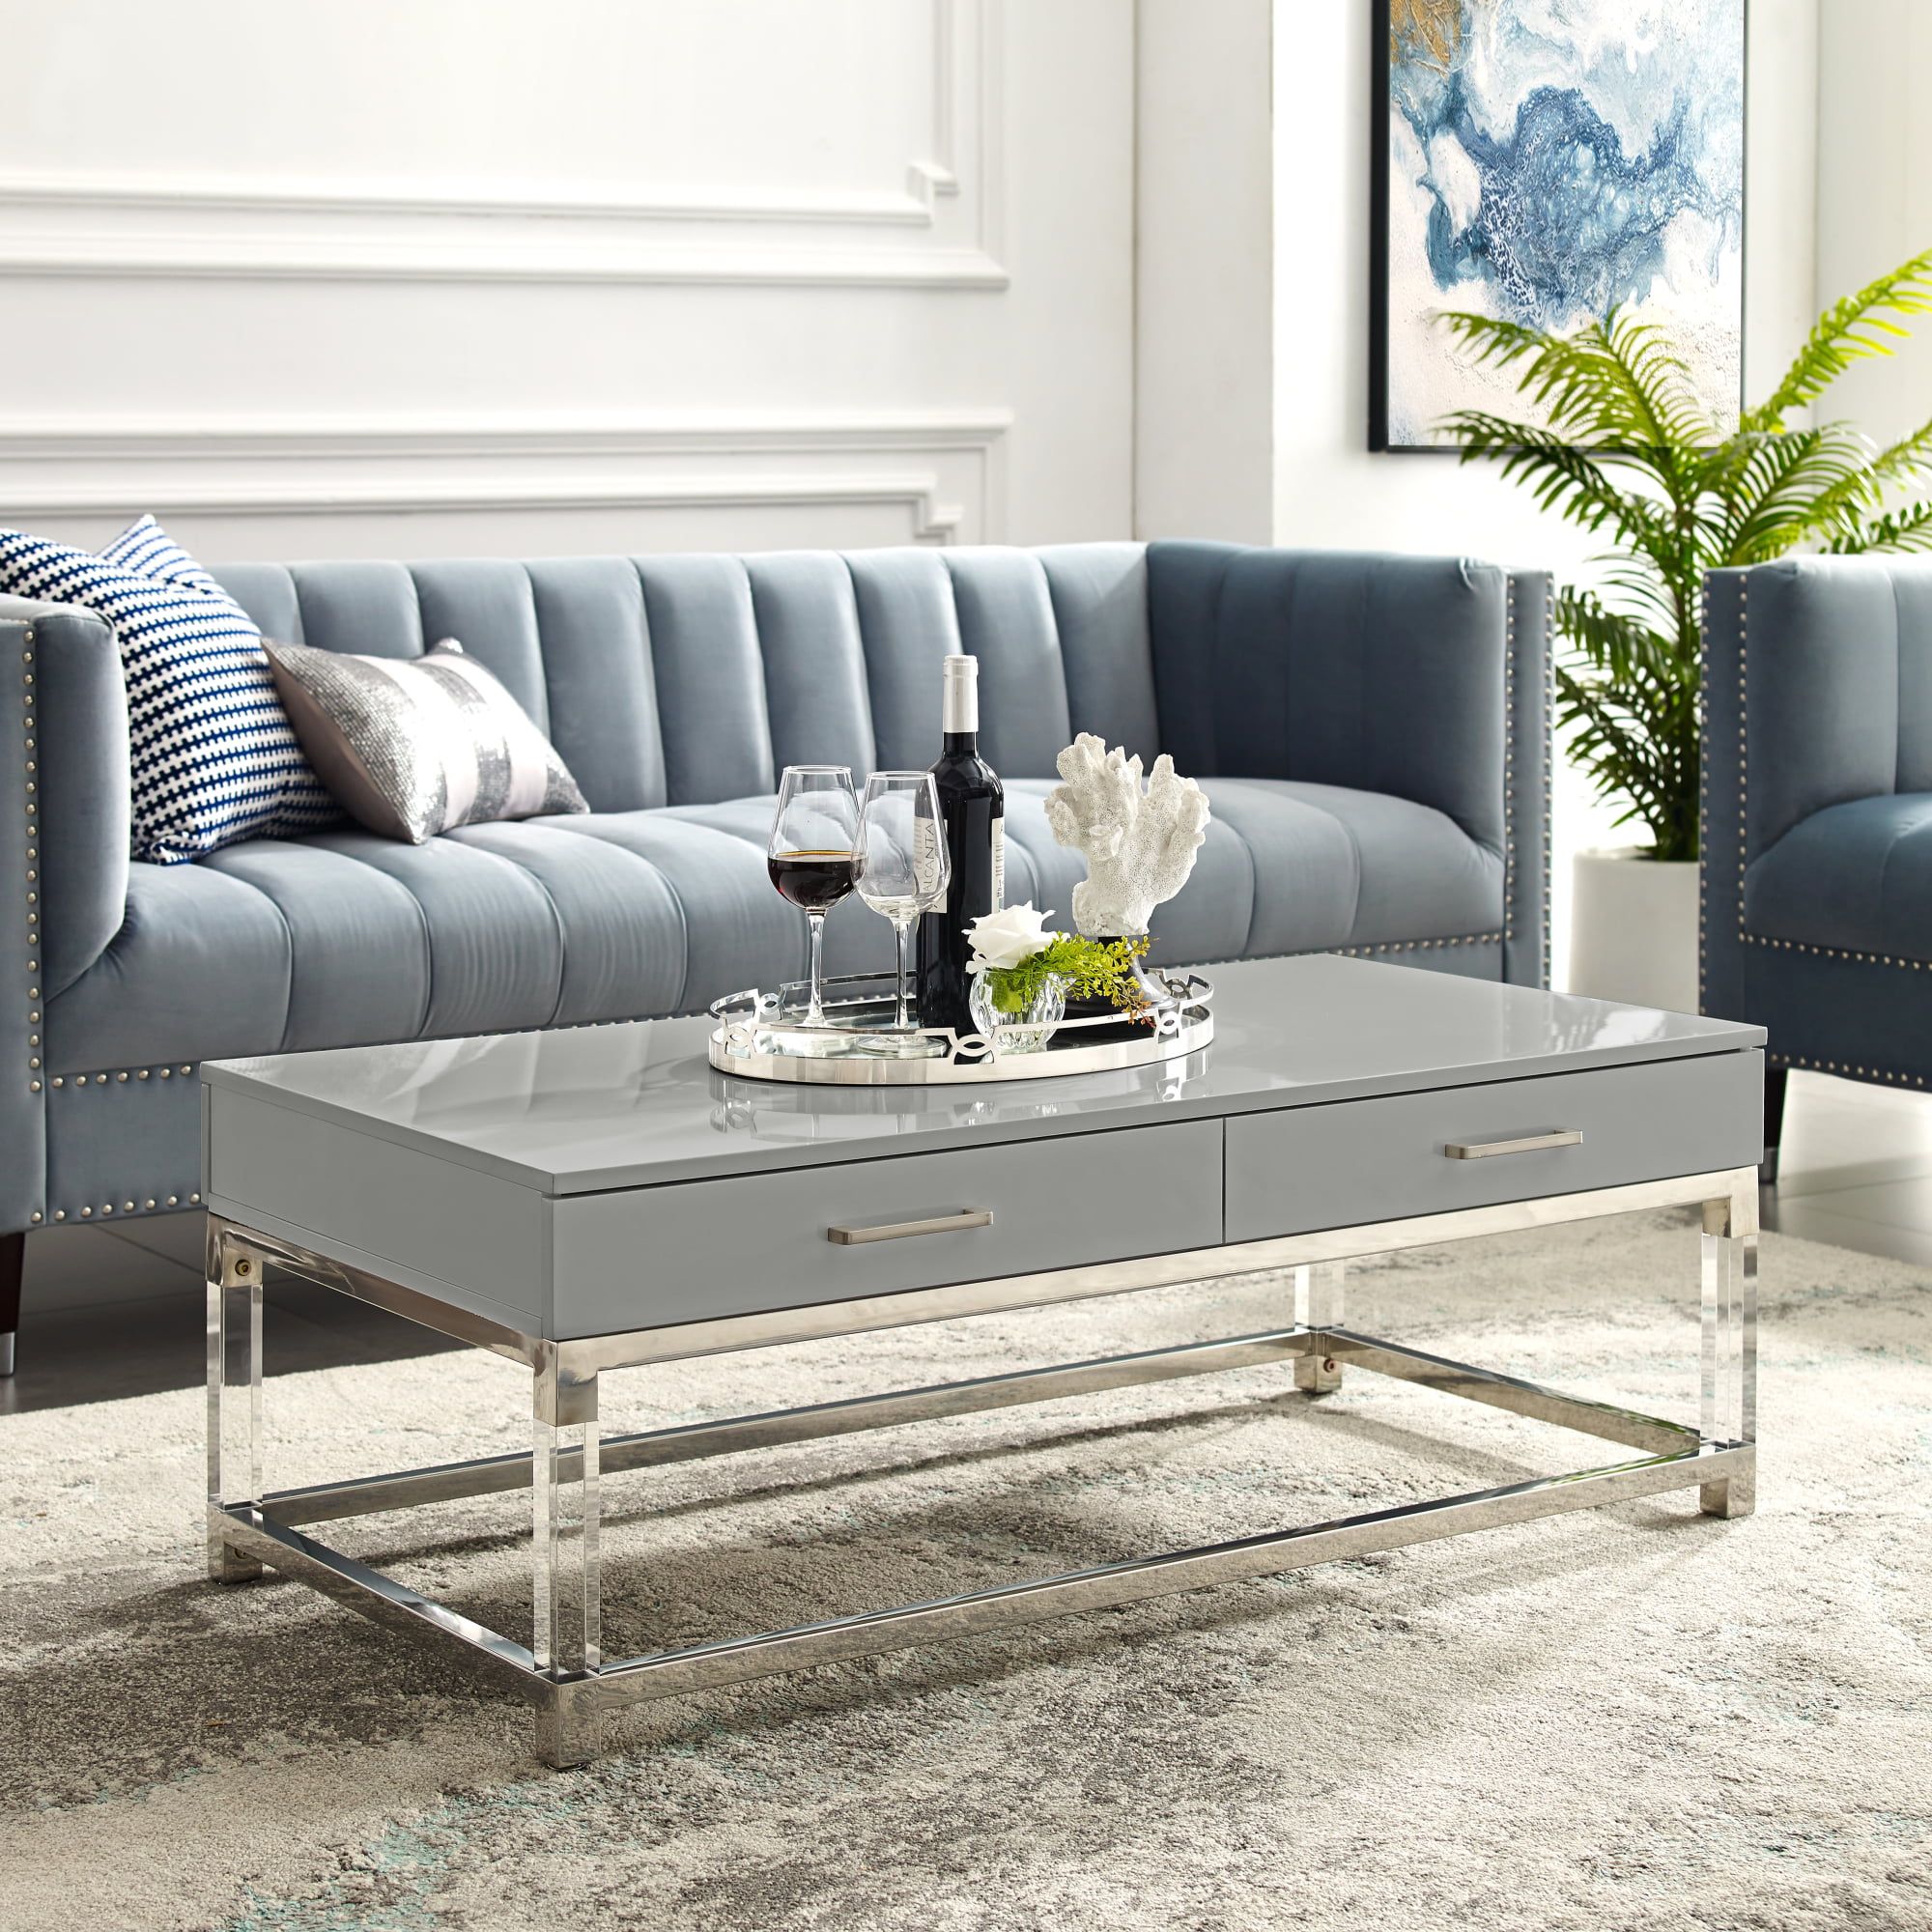 Alena Grey Coffee Table – 2 Drawers | High Gloss | Acrylic Legs Throughout Glossy Finished Metal Coffee Tables (Gallery 3 of 20)